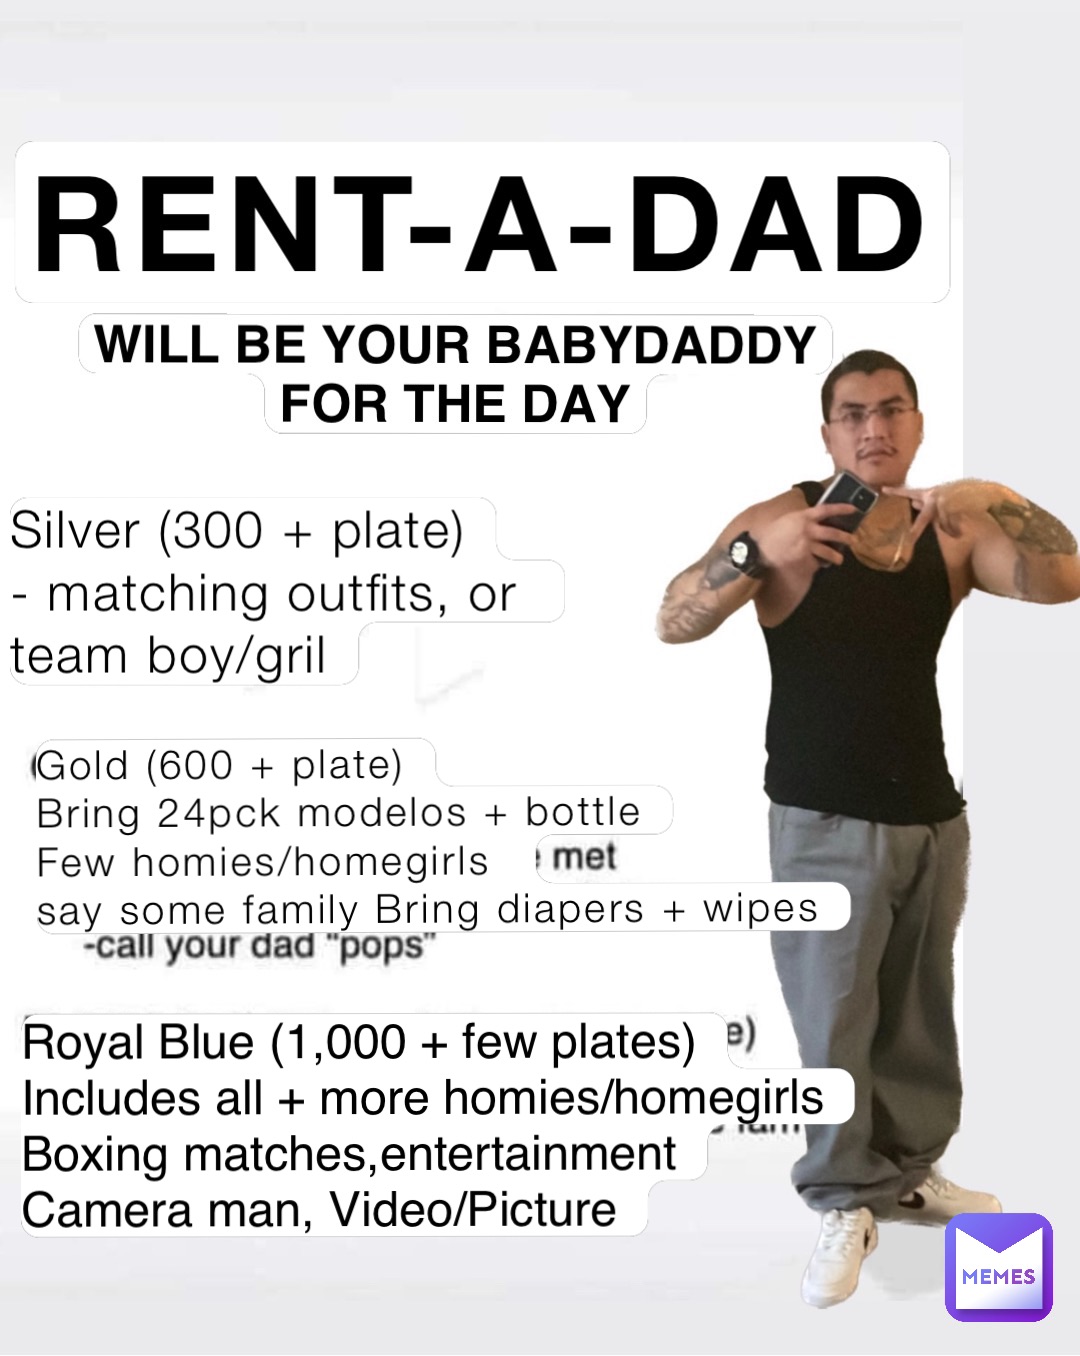 Silver (300 + plate)
- matching outfits, or team boy/gril Gold (600 + plate)
Bring 24pck modelos + bottle
Few homies/homegirls 
say some family Bring diapers + wipes Royal Blue (1,000 + few plates)
Includes all + more homies/homegirls
Boxing matches,entertainment
Camera man, Video/Picture